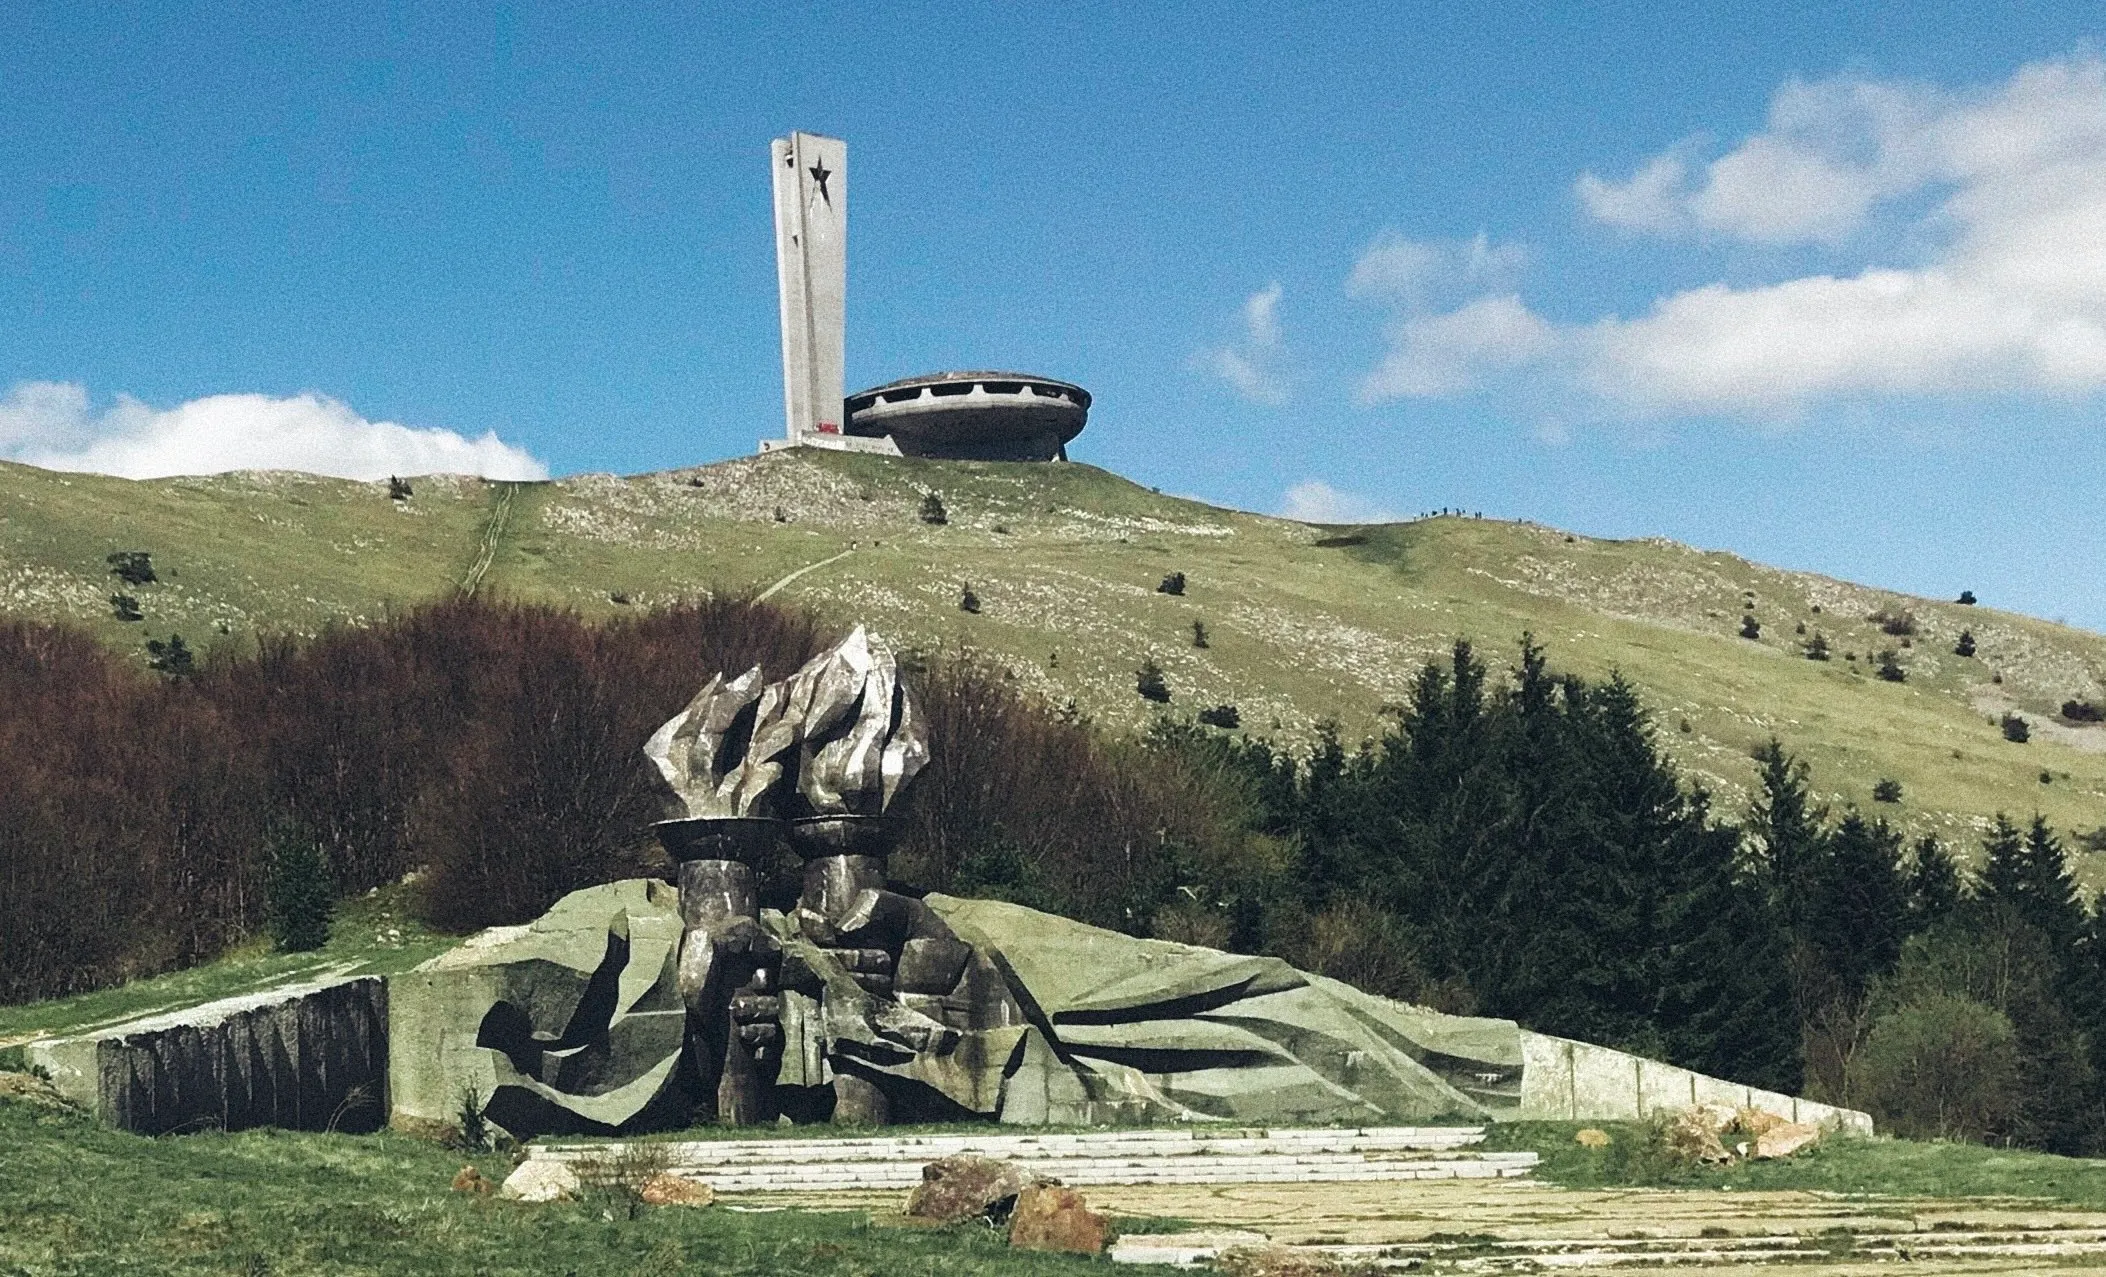 The image depicts the real-life Buzludzha Monument located in Bulgaria. It shows the monument perched atop a grassy hill, with a central tower and a flying saucer-like building with a ring of windows around it. In the foreground, there is a large, abstract metal sculpture featuring dynamic shapes and figures, which seems to be part of a memorial ensemble. The sky is partly cloudy, suggesting a bright yet breezy day. The surrounding landscape is a mix of grassy slopes and forested areas, which adds to the imposing and somewhat isolated setting of the monument. The monument itself has a stark, Brutalist architectural style, standing out against the natural backdrop.